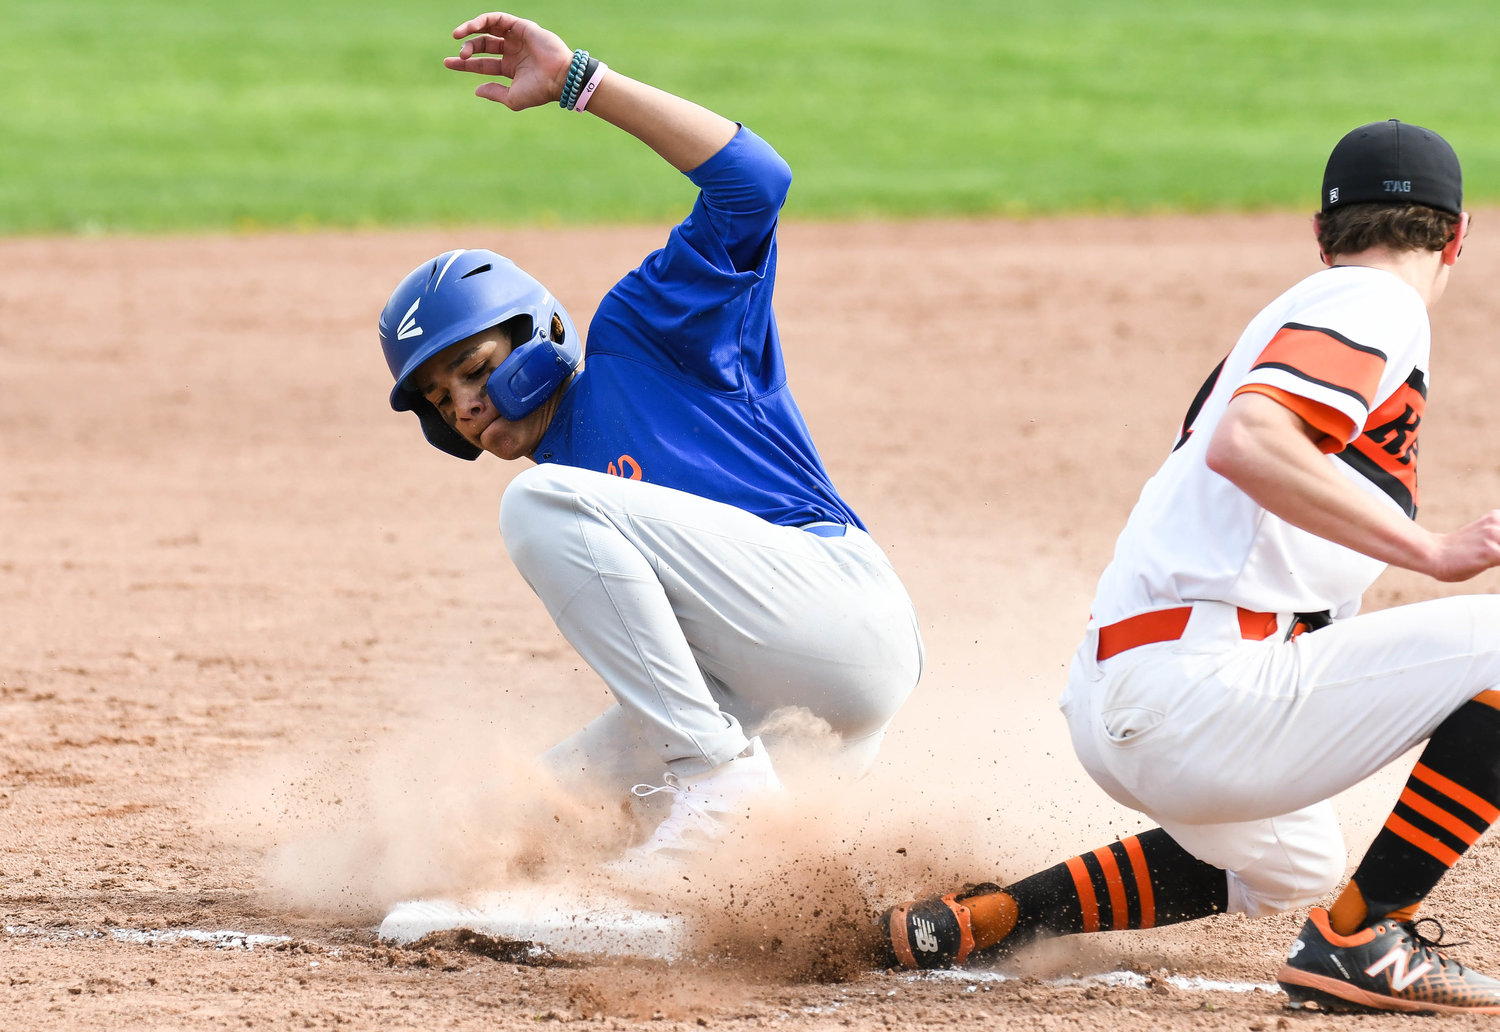 Oneida baserunner Andrew Murray slides safely into third base during the game against Rome Free Academy on Thursday. Oneida won 5-4 in a comeback. Murray had two doubles, two runs and an RBI. He also earned the save.